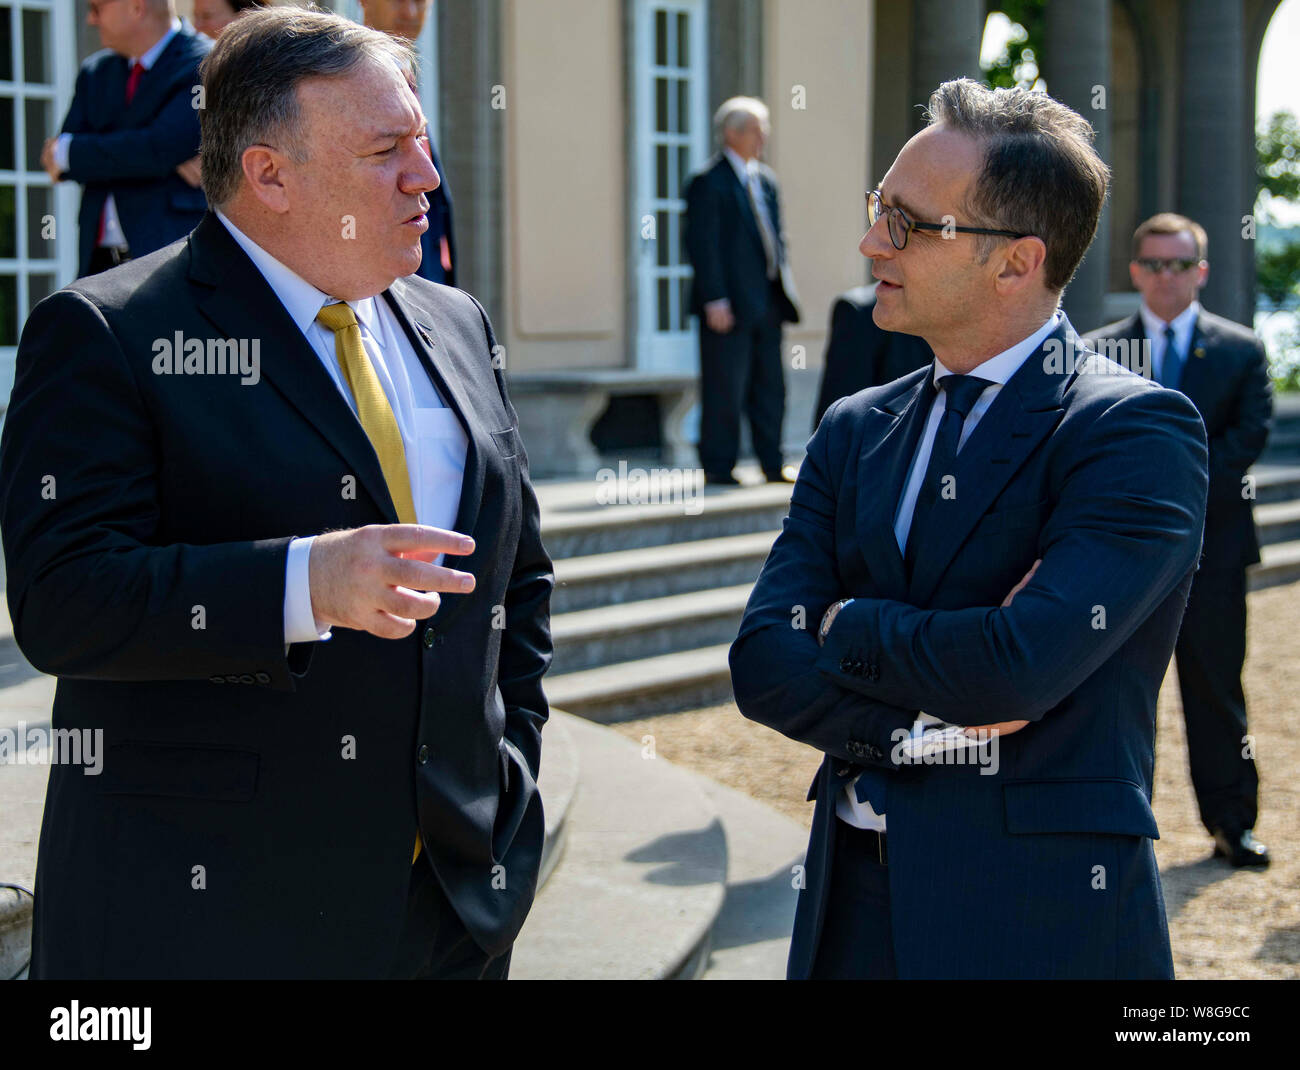 U.S. Secretary of State Michael R. Pompeo meets with German Foreign Minister Heiko Maas in Berlin, Germany, on May 31, 2019. Stock Photo